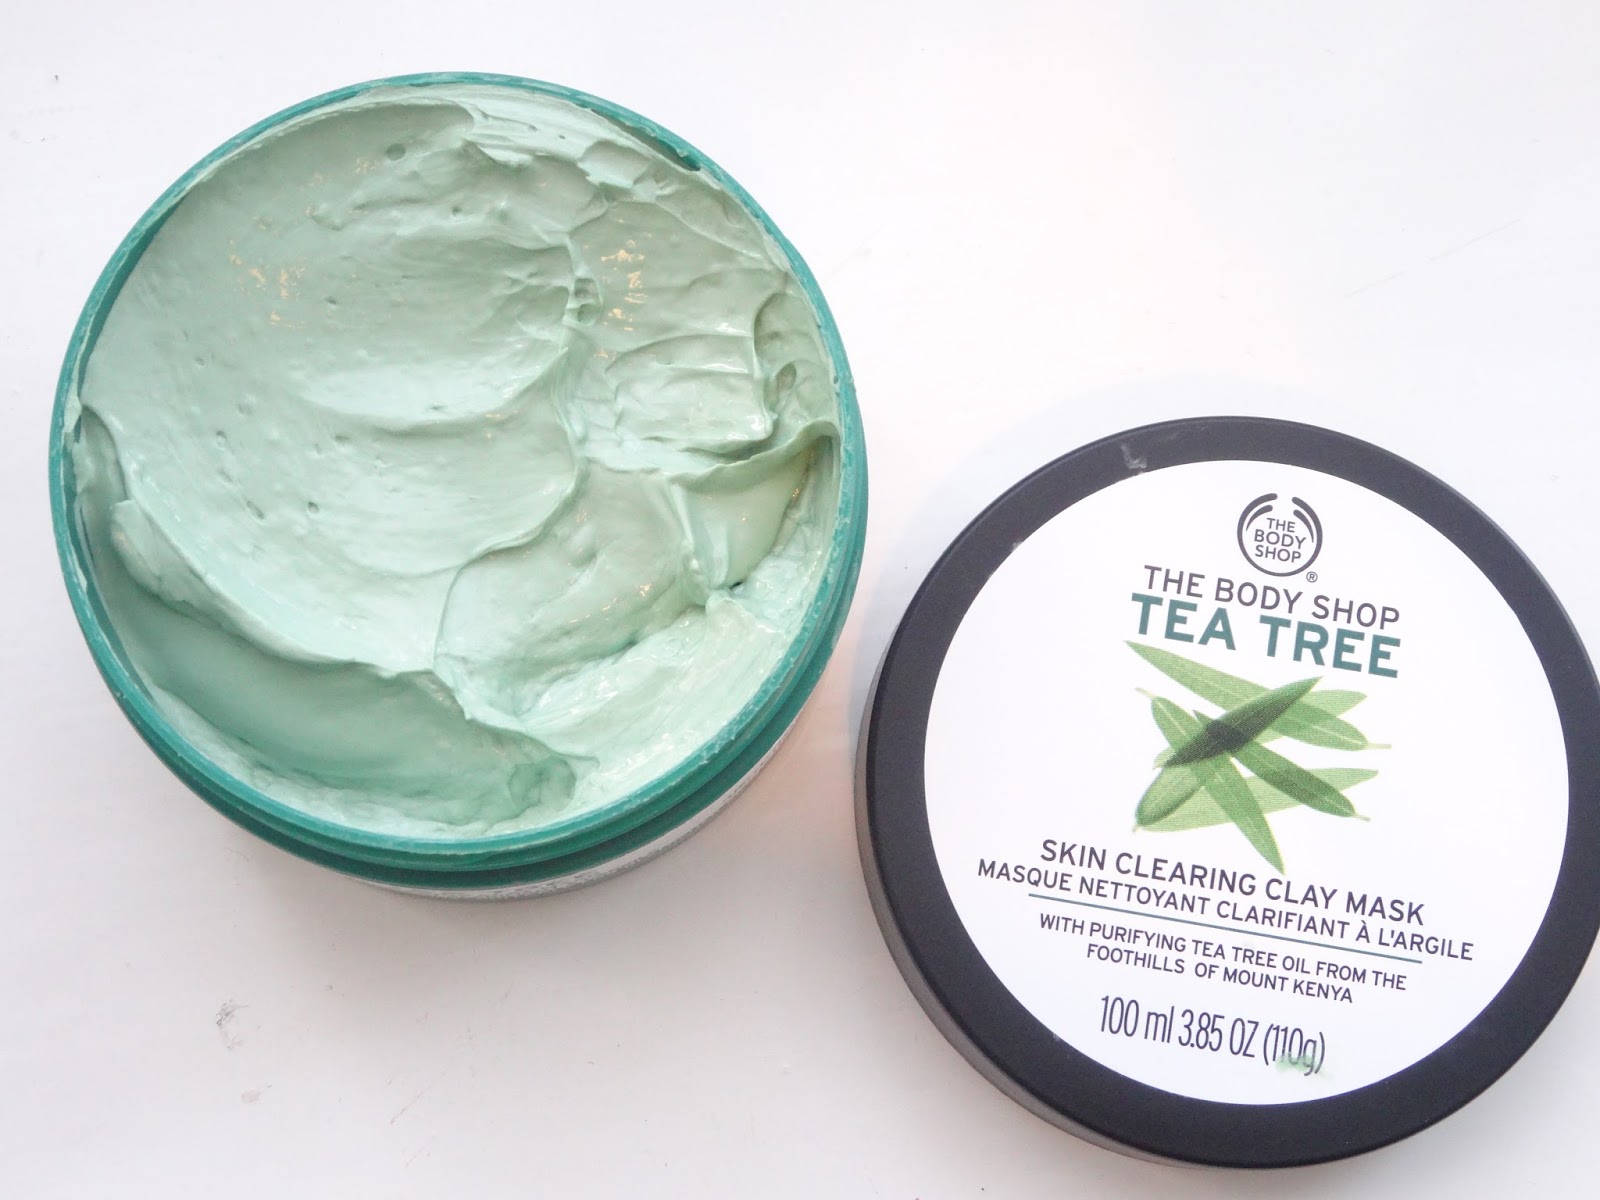 The Shop Skin Clearing Tea Tree Face Mask Review - ○ Laura Thornberry ○ Lifestyle Blogger London Based ○